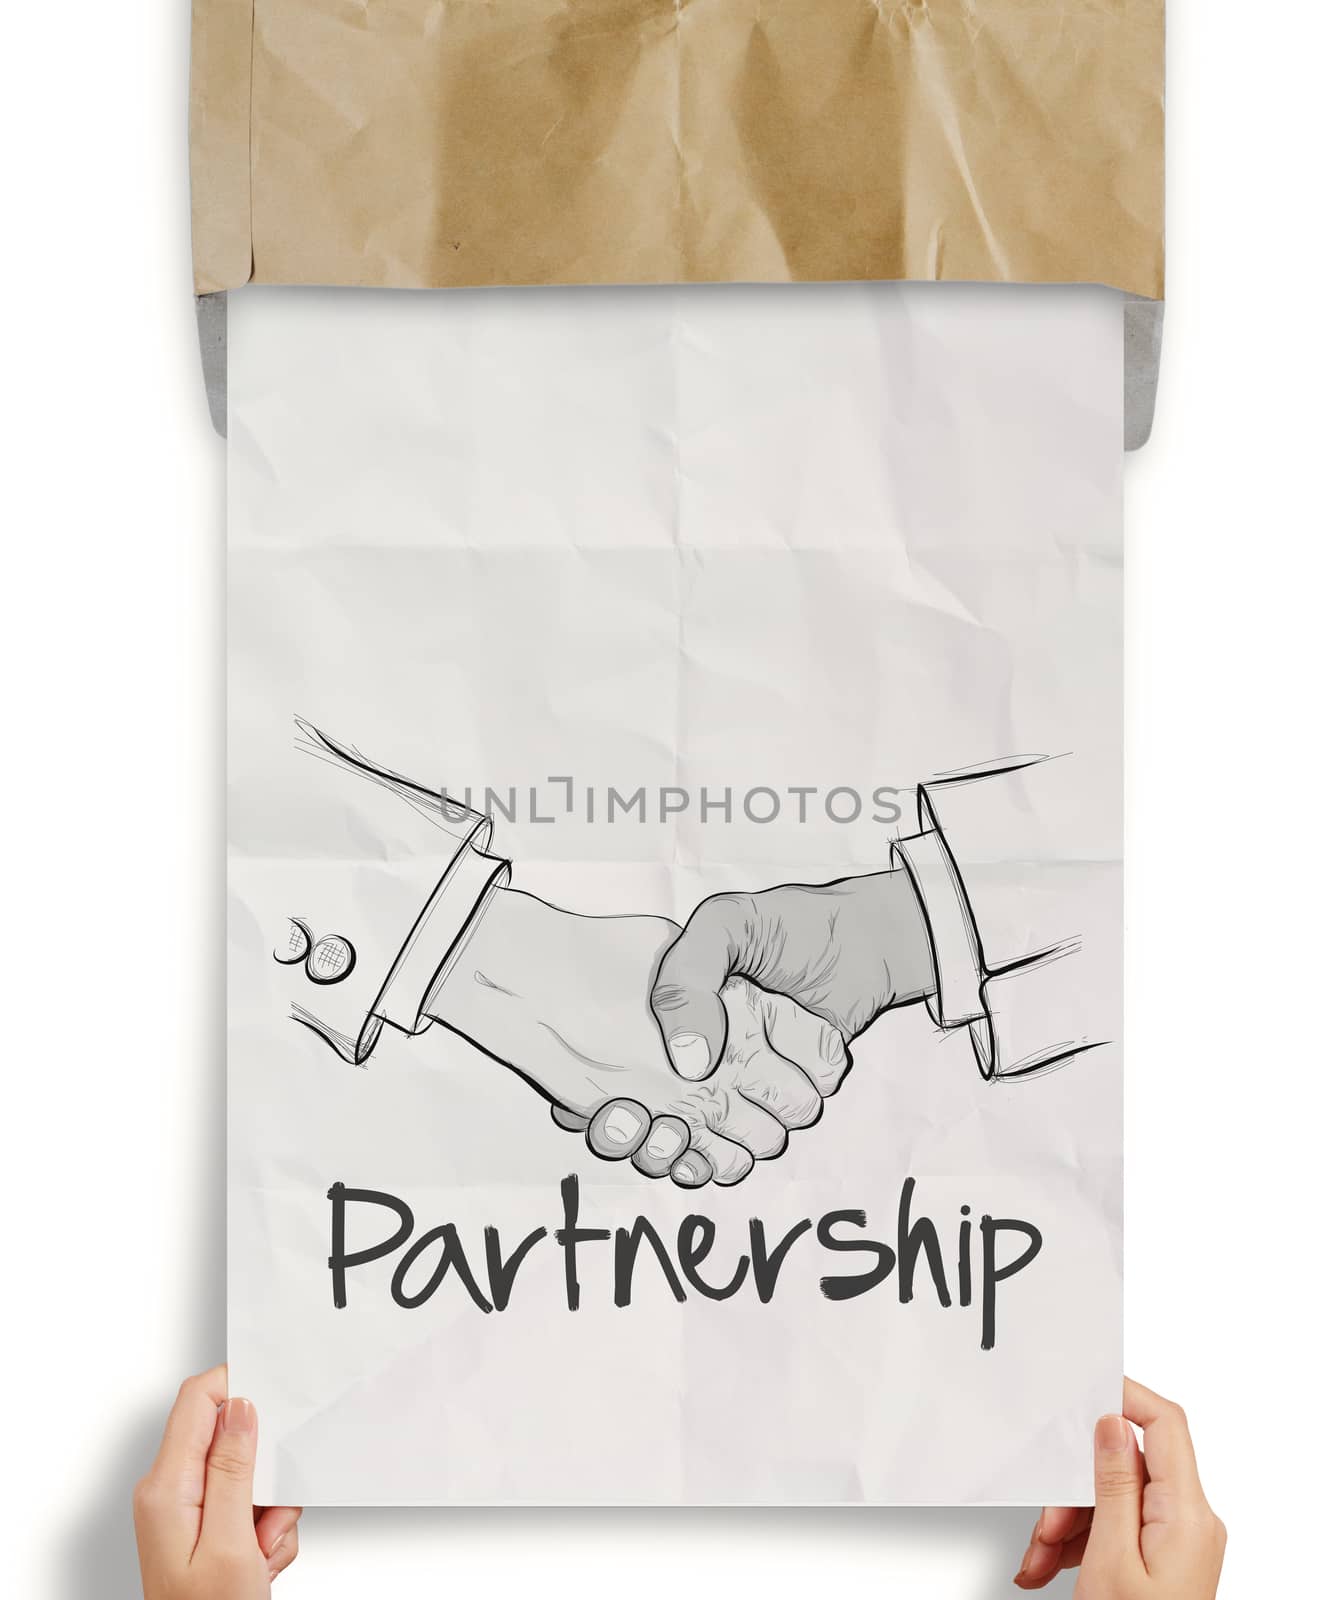 hand drawn handshake sign on crumpled paper as partnership business concept